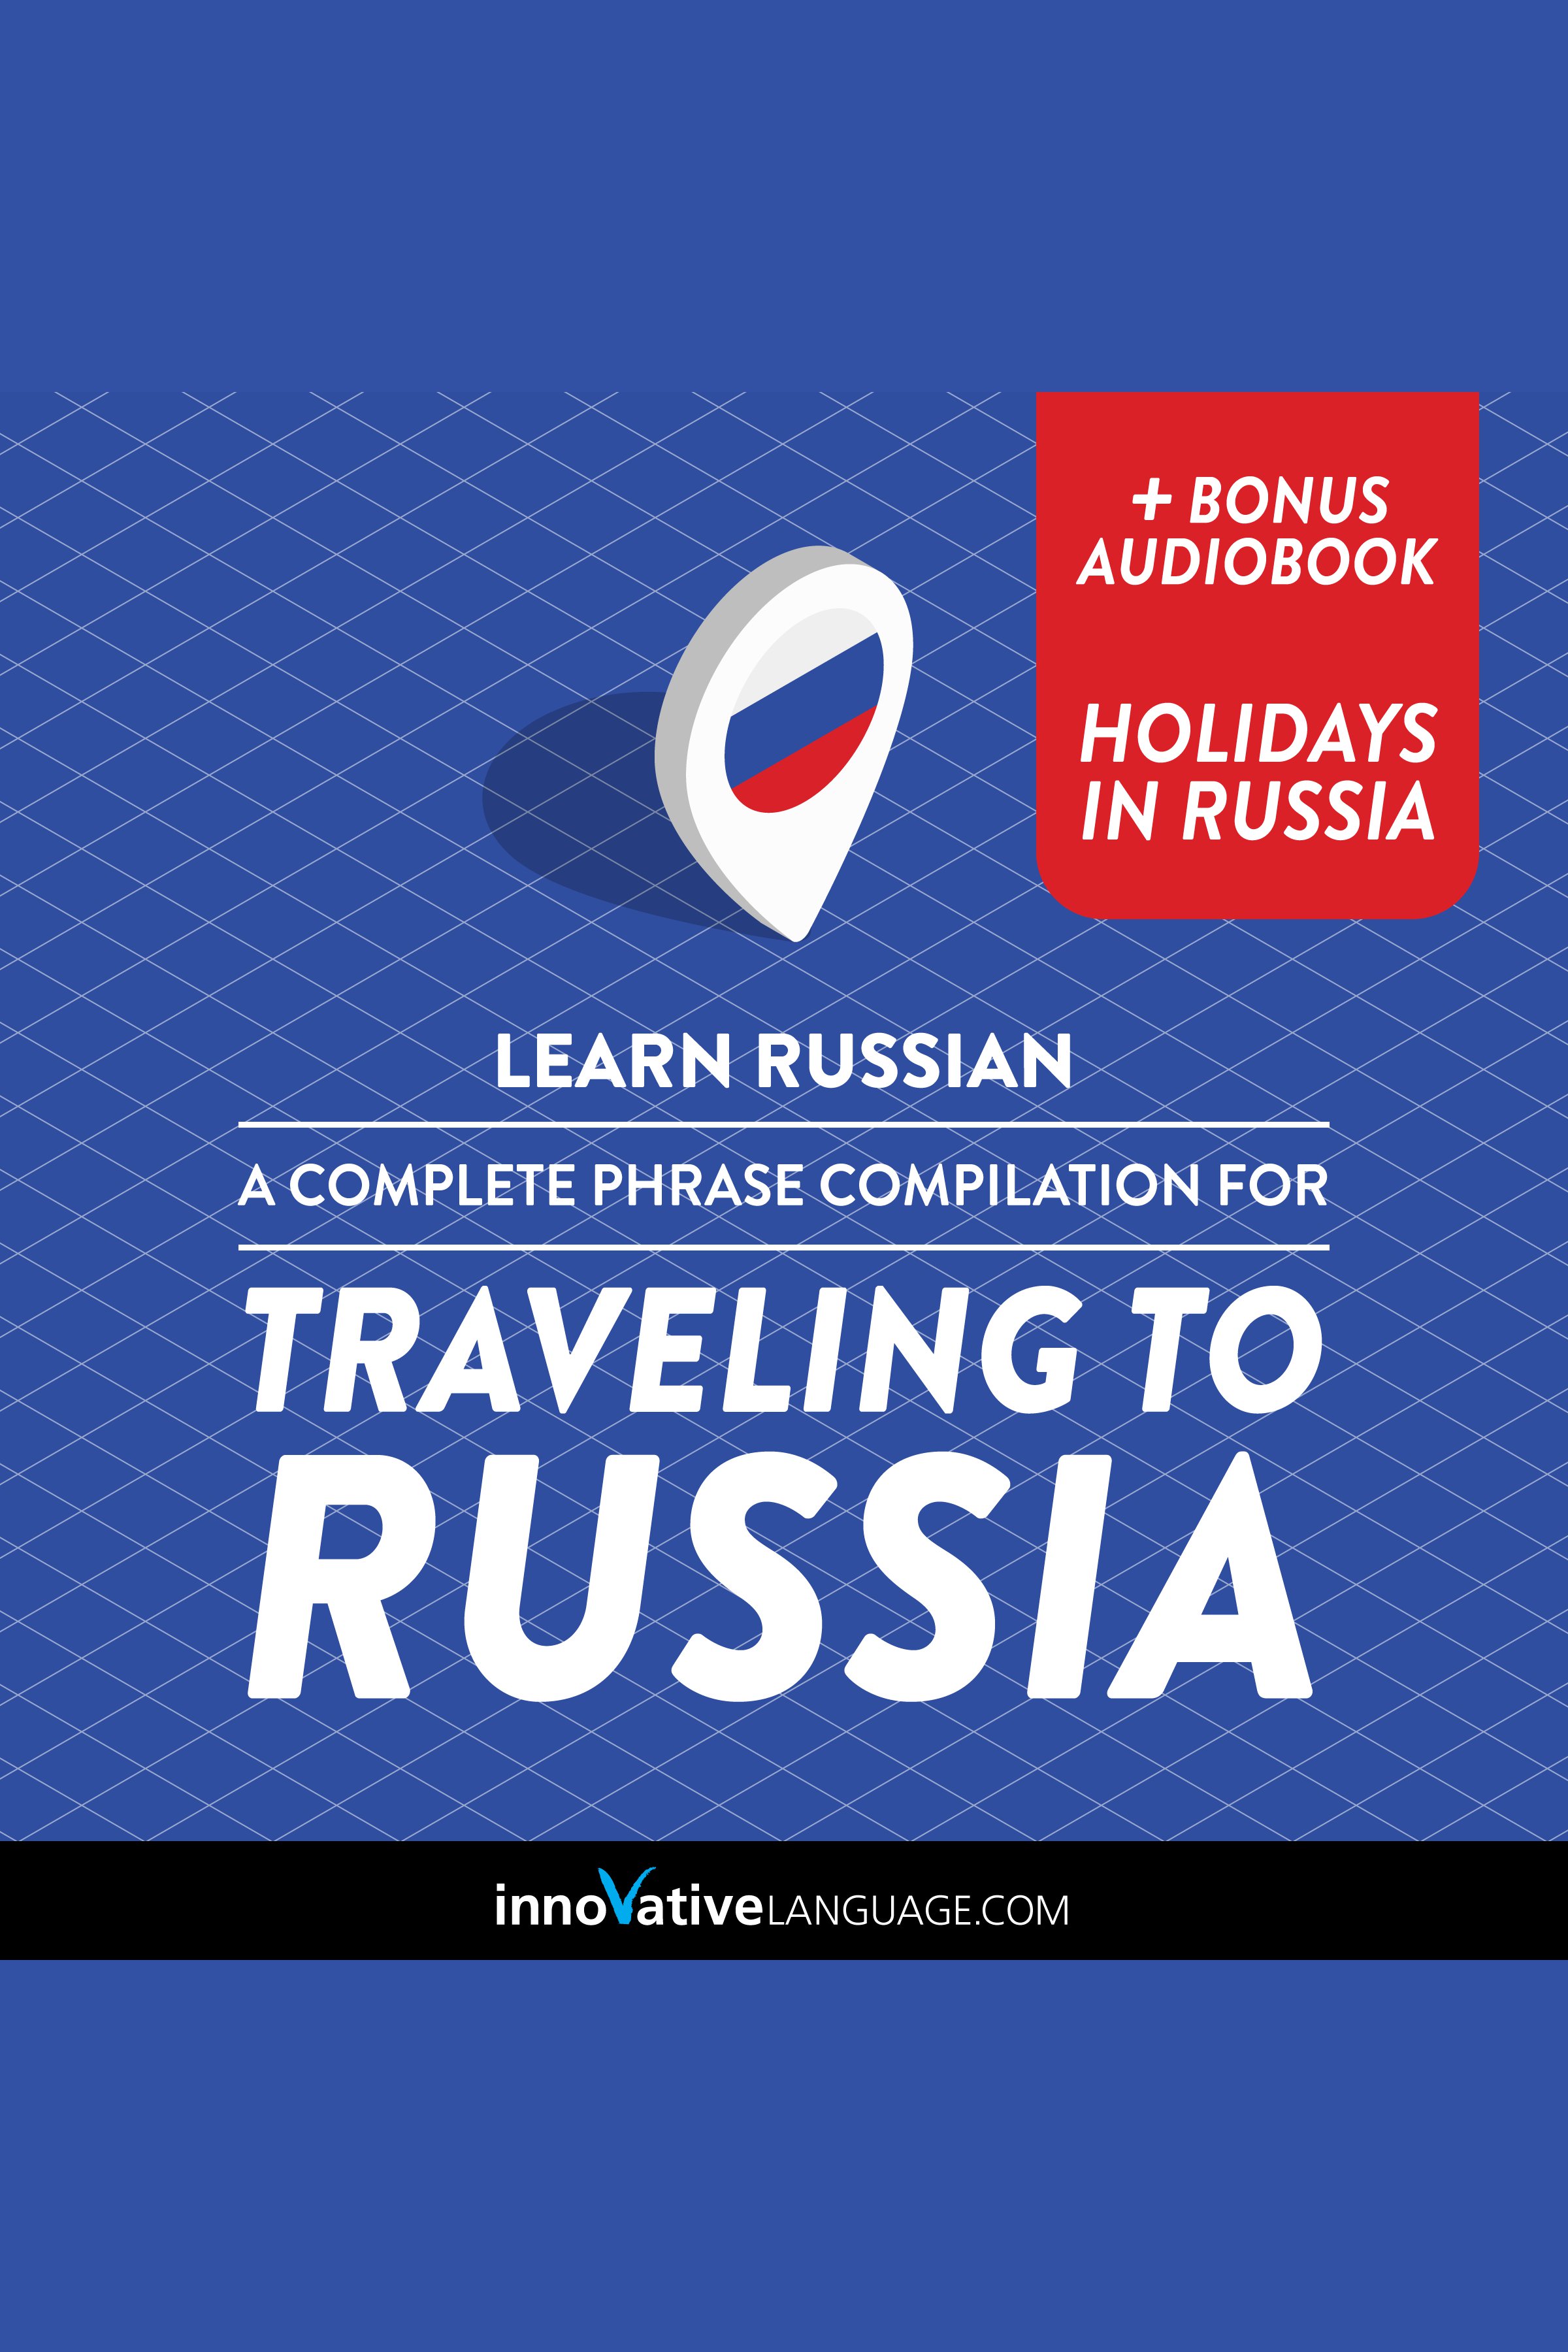 Learn Russian: A Complete Phrase Compilation for Traveling to Russia cover image